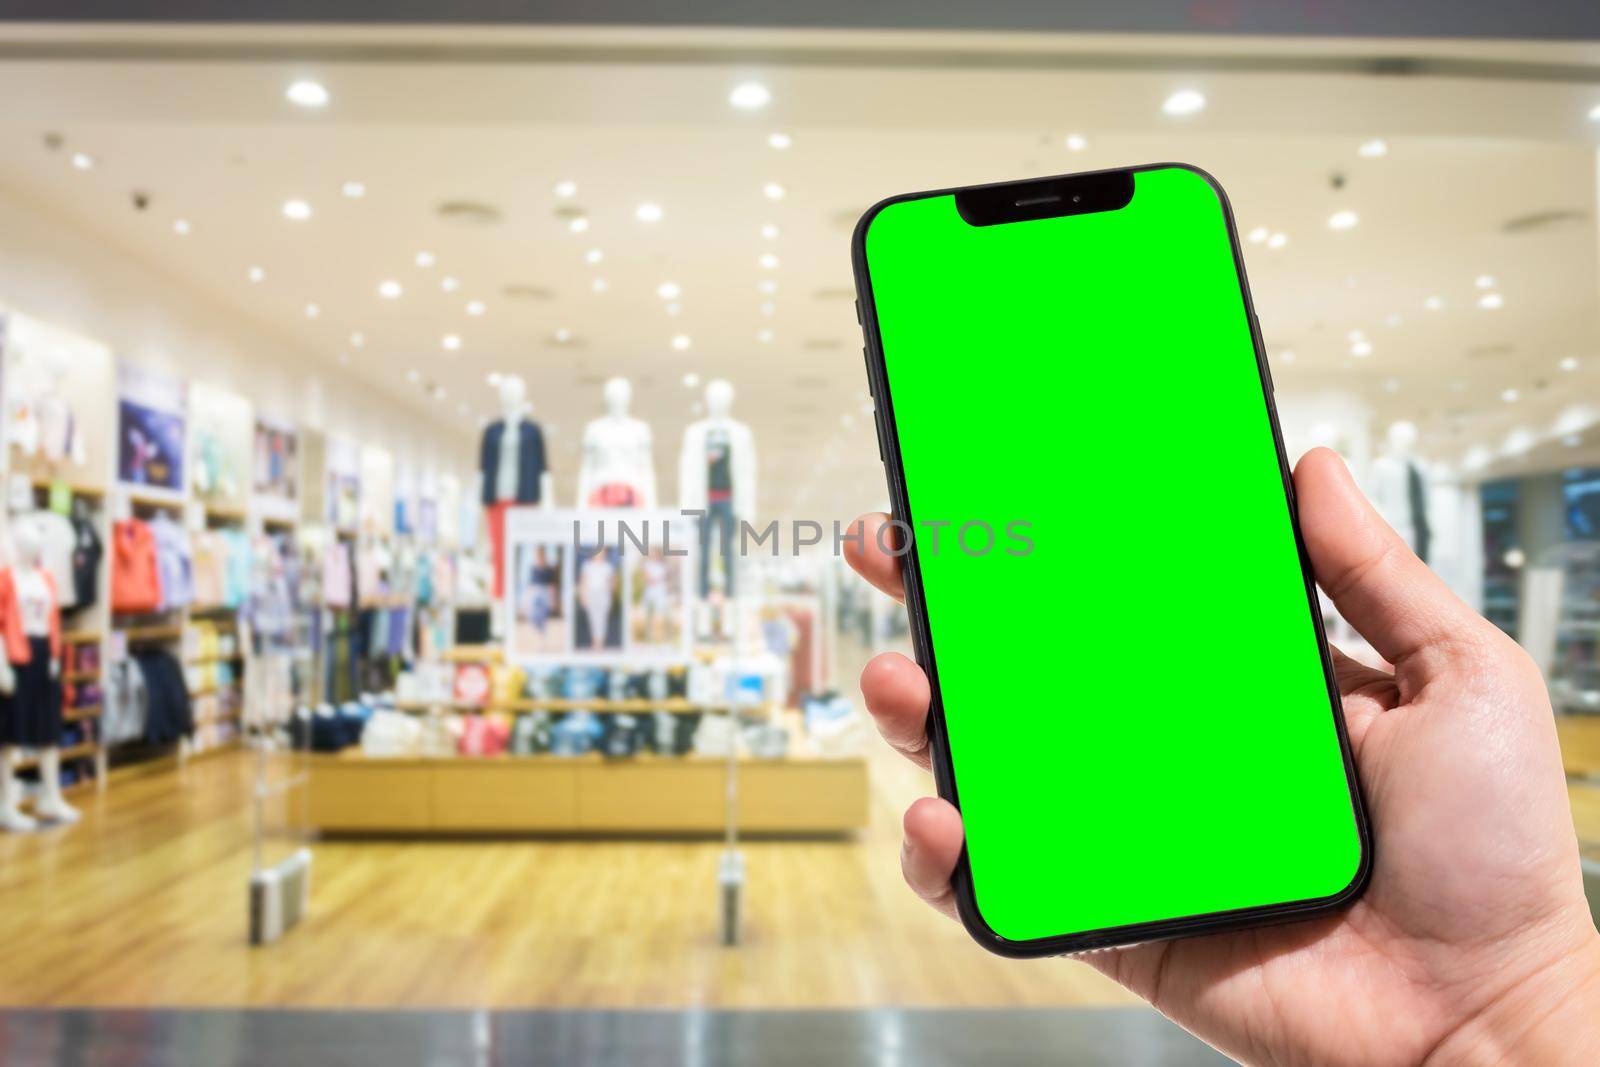 Close-up of female use smartphone blurred images in the mall and Clothes shop blur of the background.